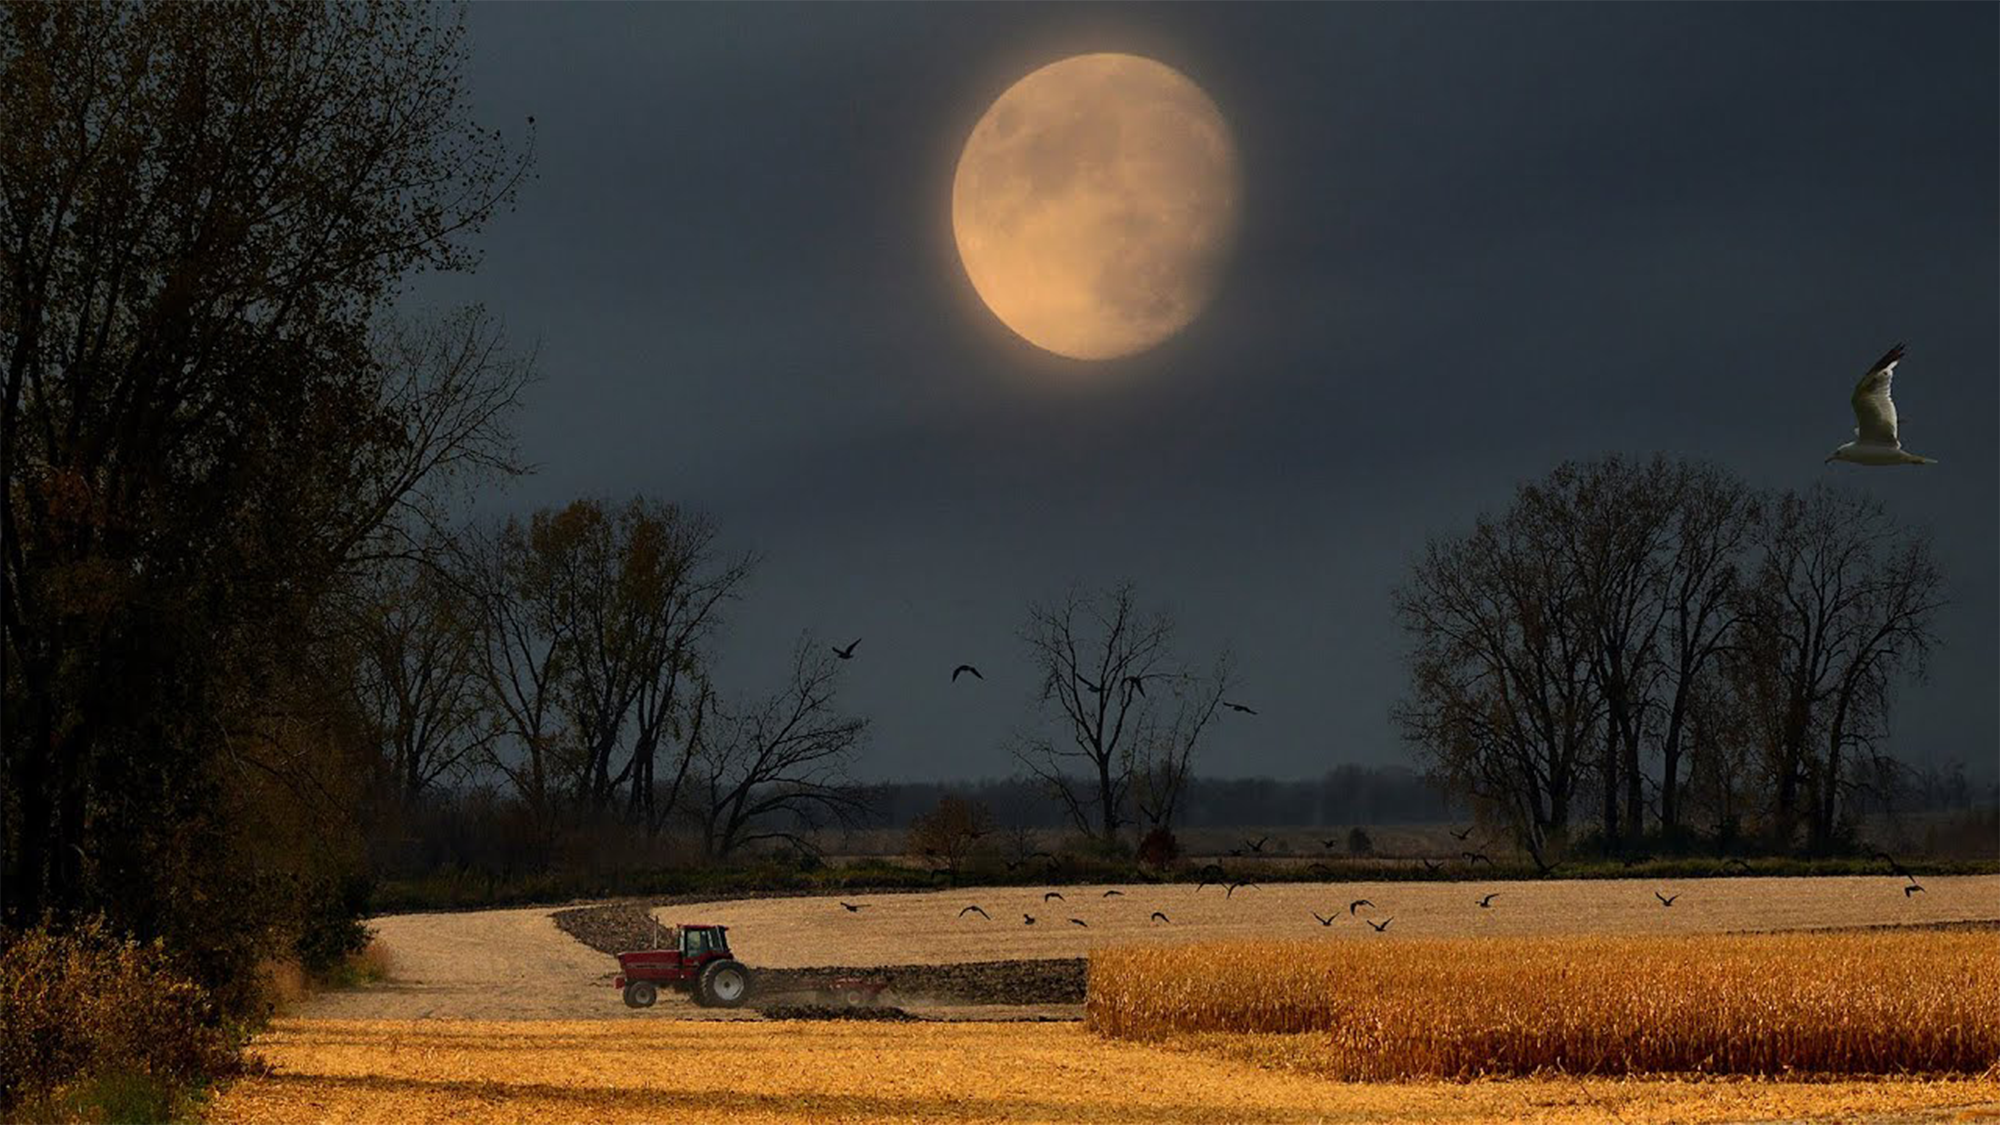 The Harvest Moon on October 1, 2020 over a field in Waseca, Minnesota.